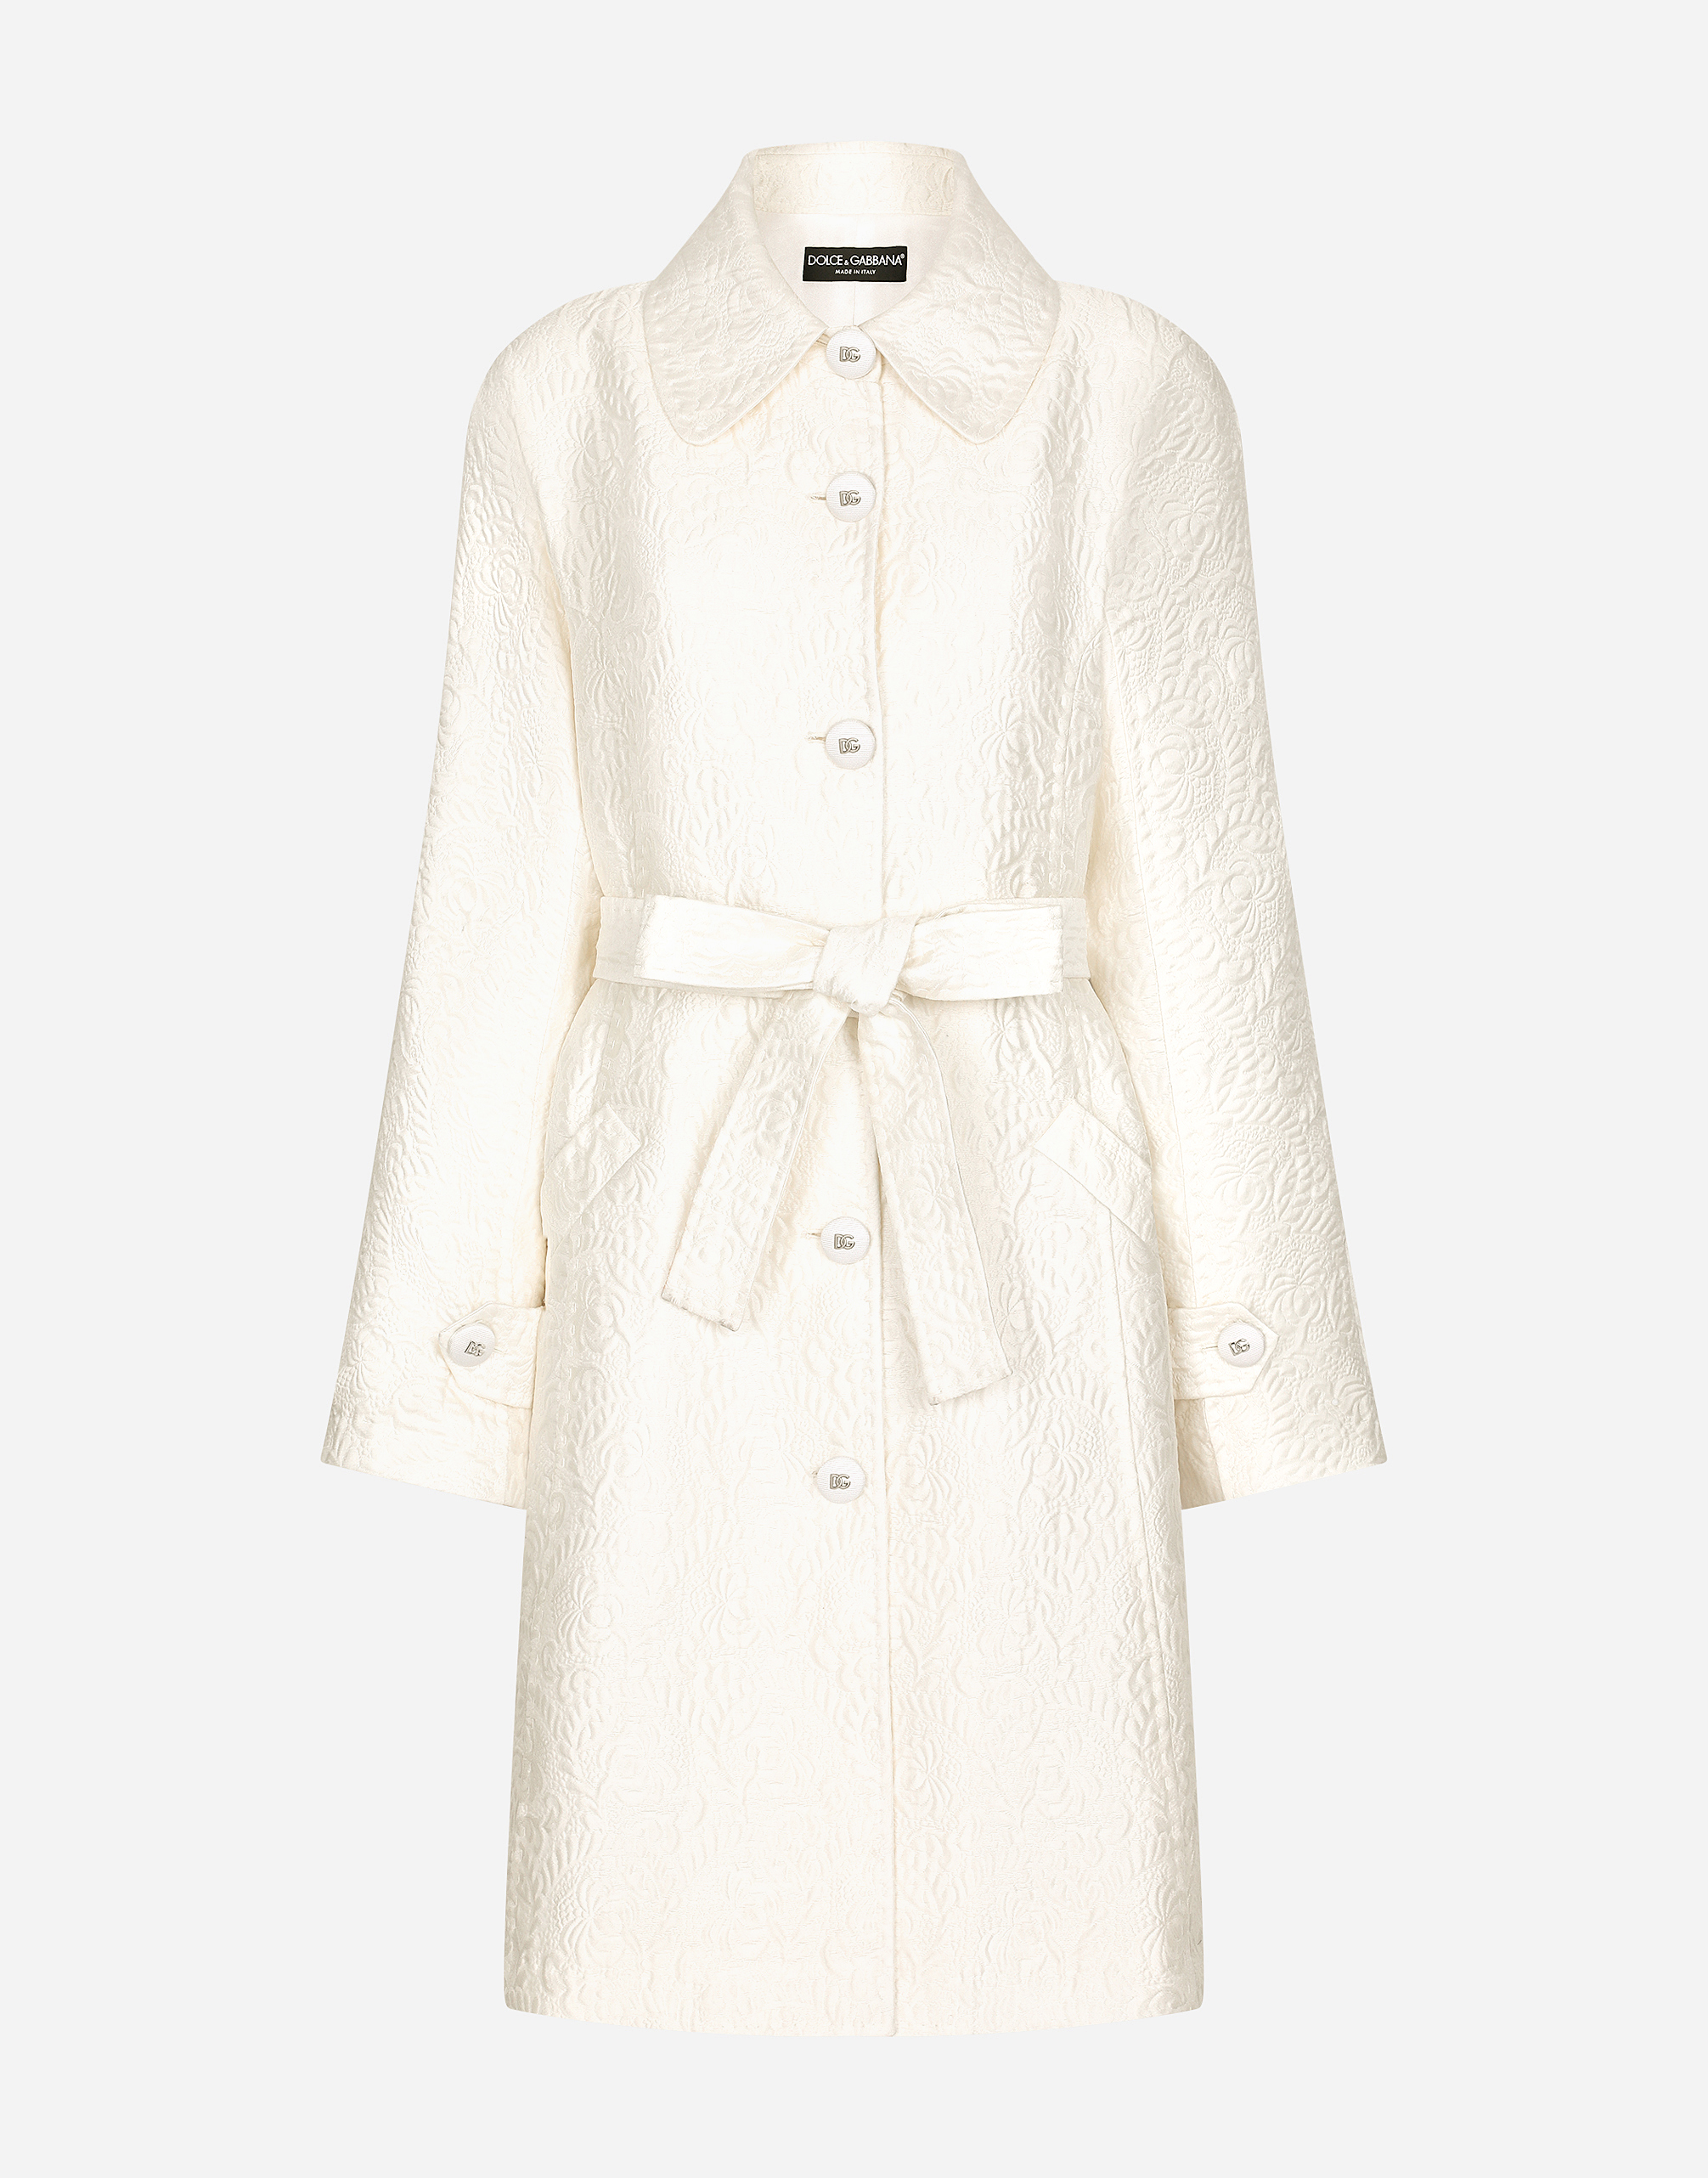 Belted floral jacquard coat in White